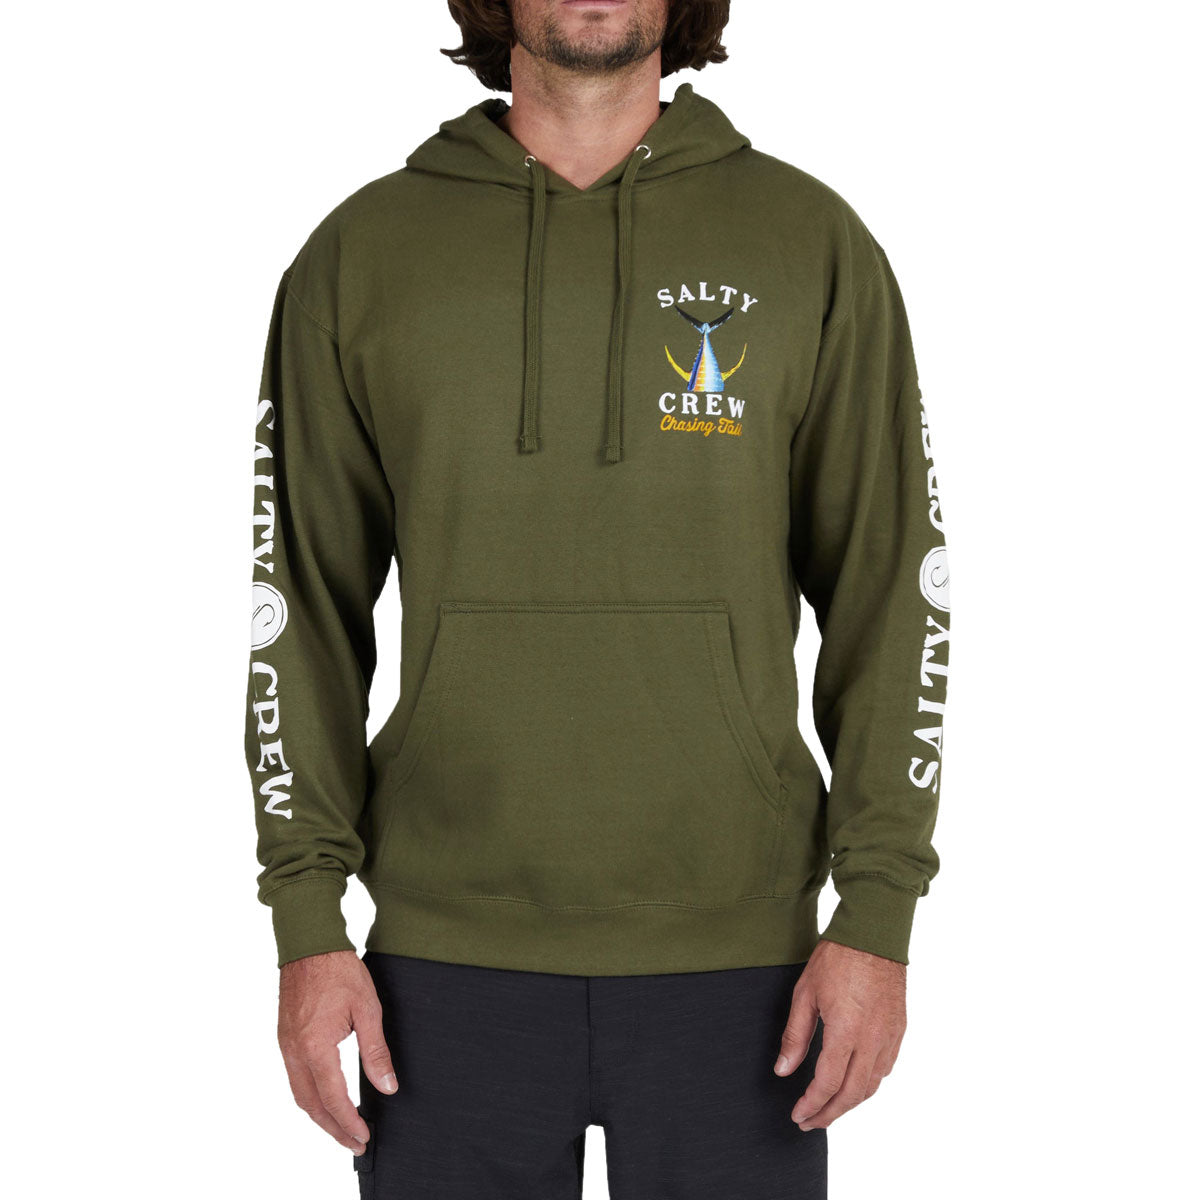 Salty Crew Tailed Hoodie - Army image 1